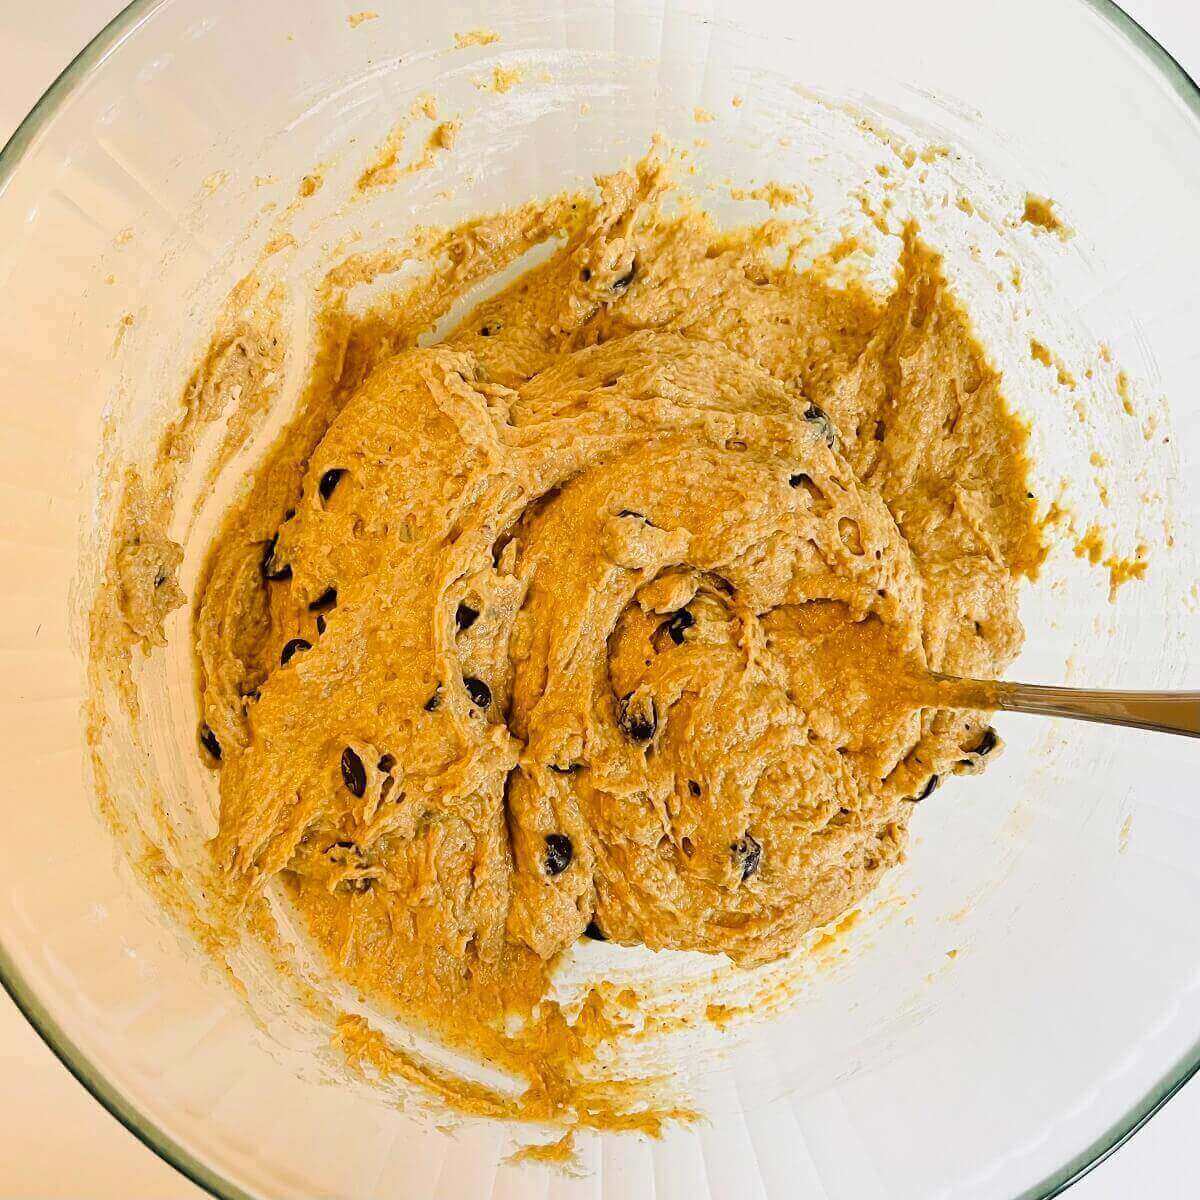 Raw vegan muffin batter in a glass bowl.